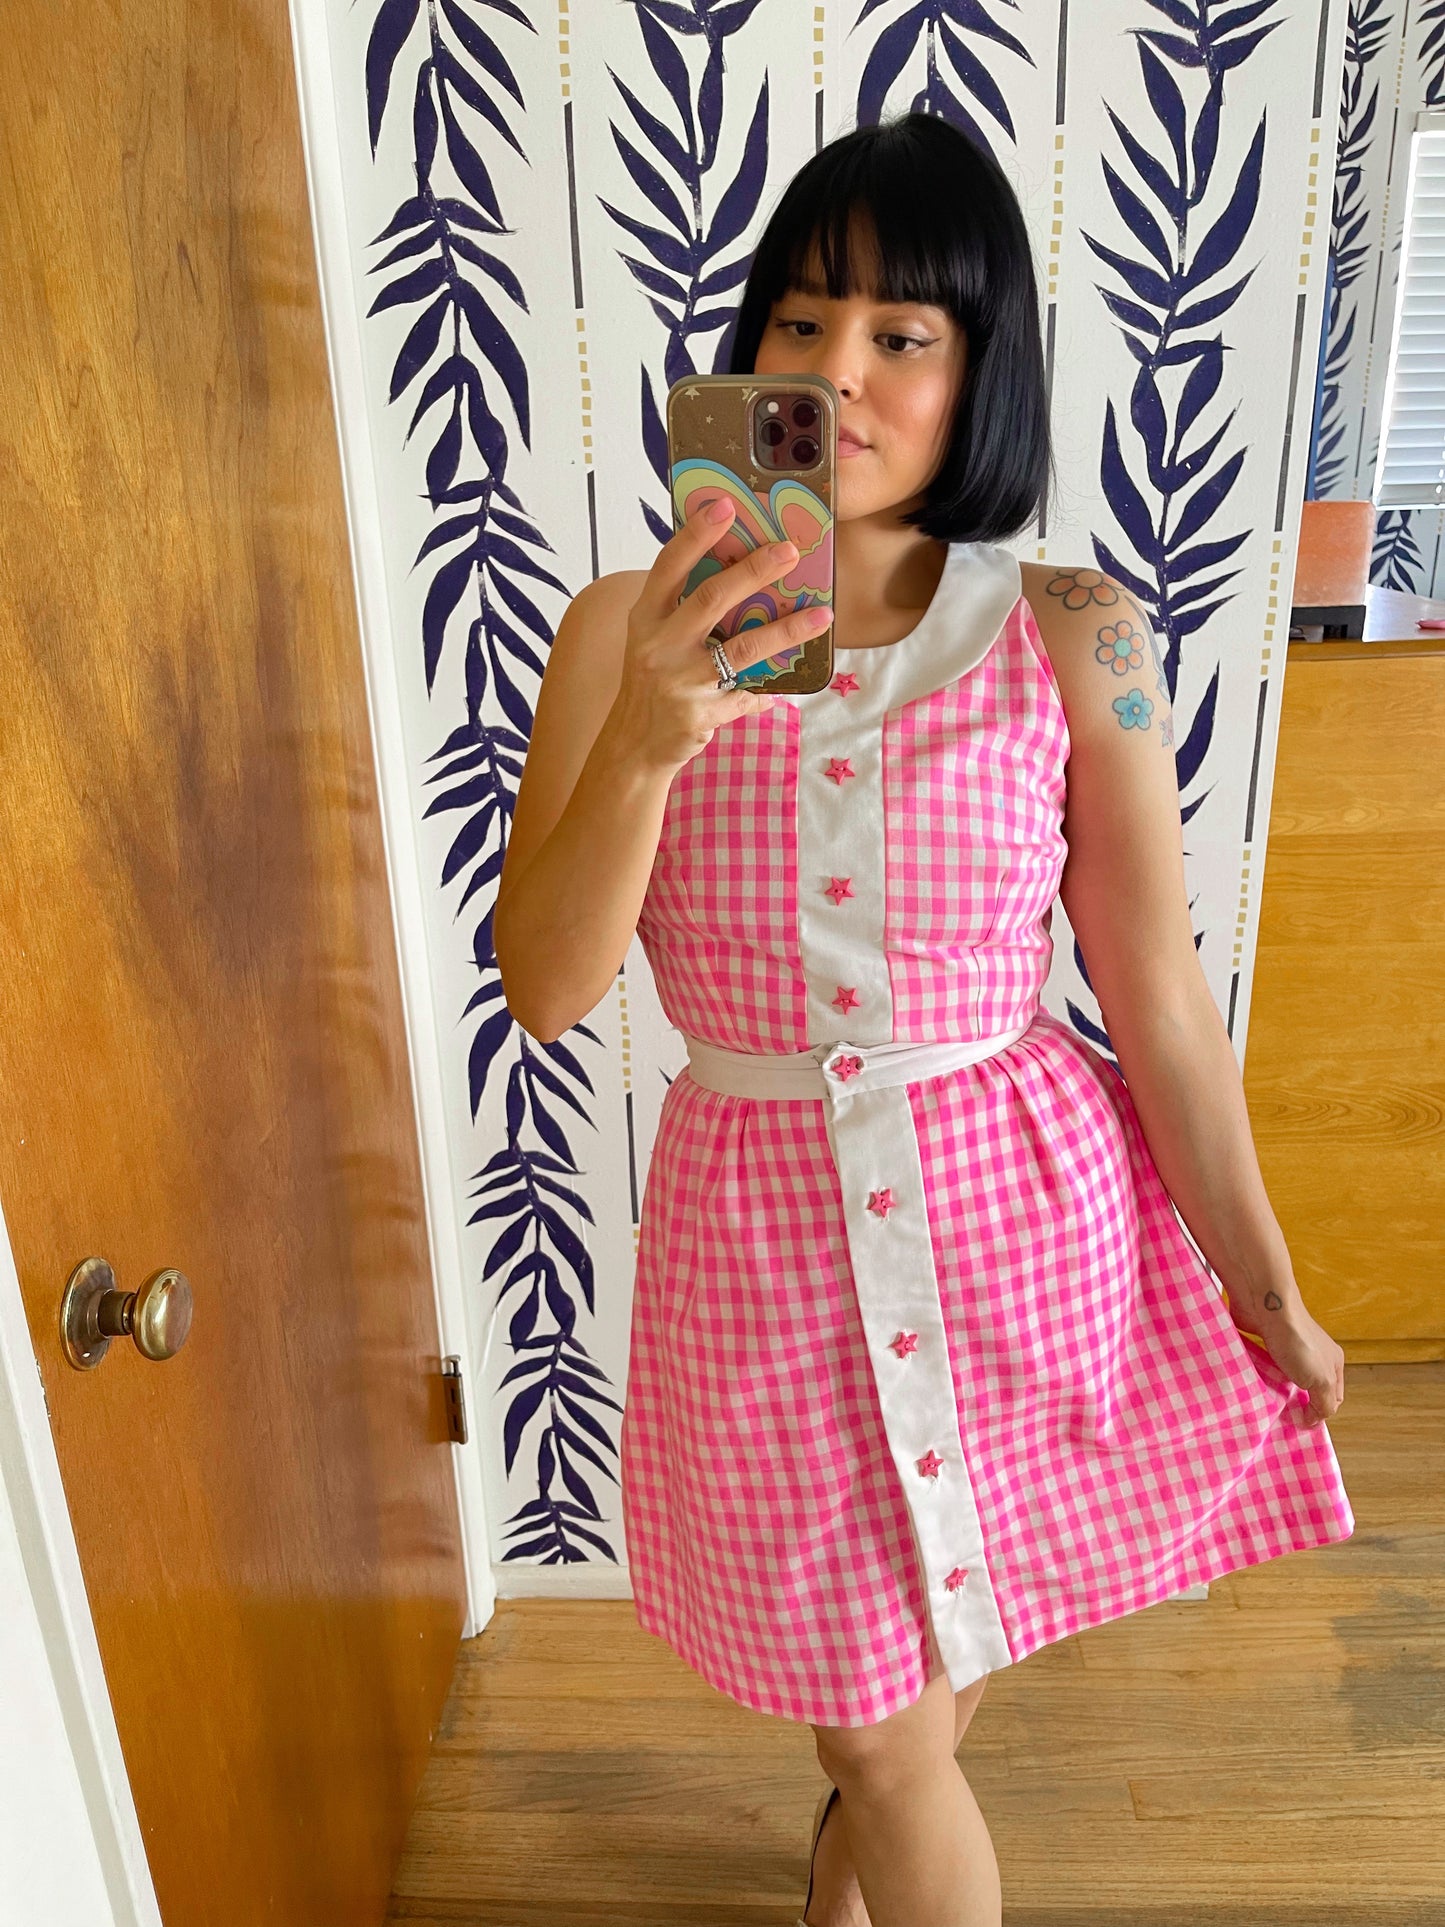 Vintage 1960s Gingham Star Buttons Pink White Romper Cotton Skirt Playsuit Set fits sizes XS-SM